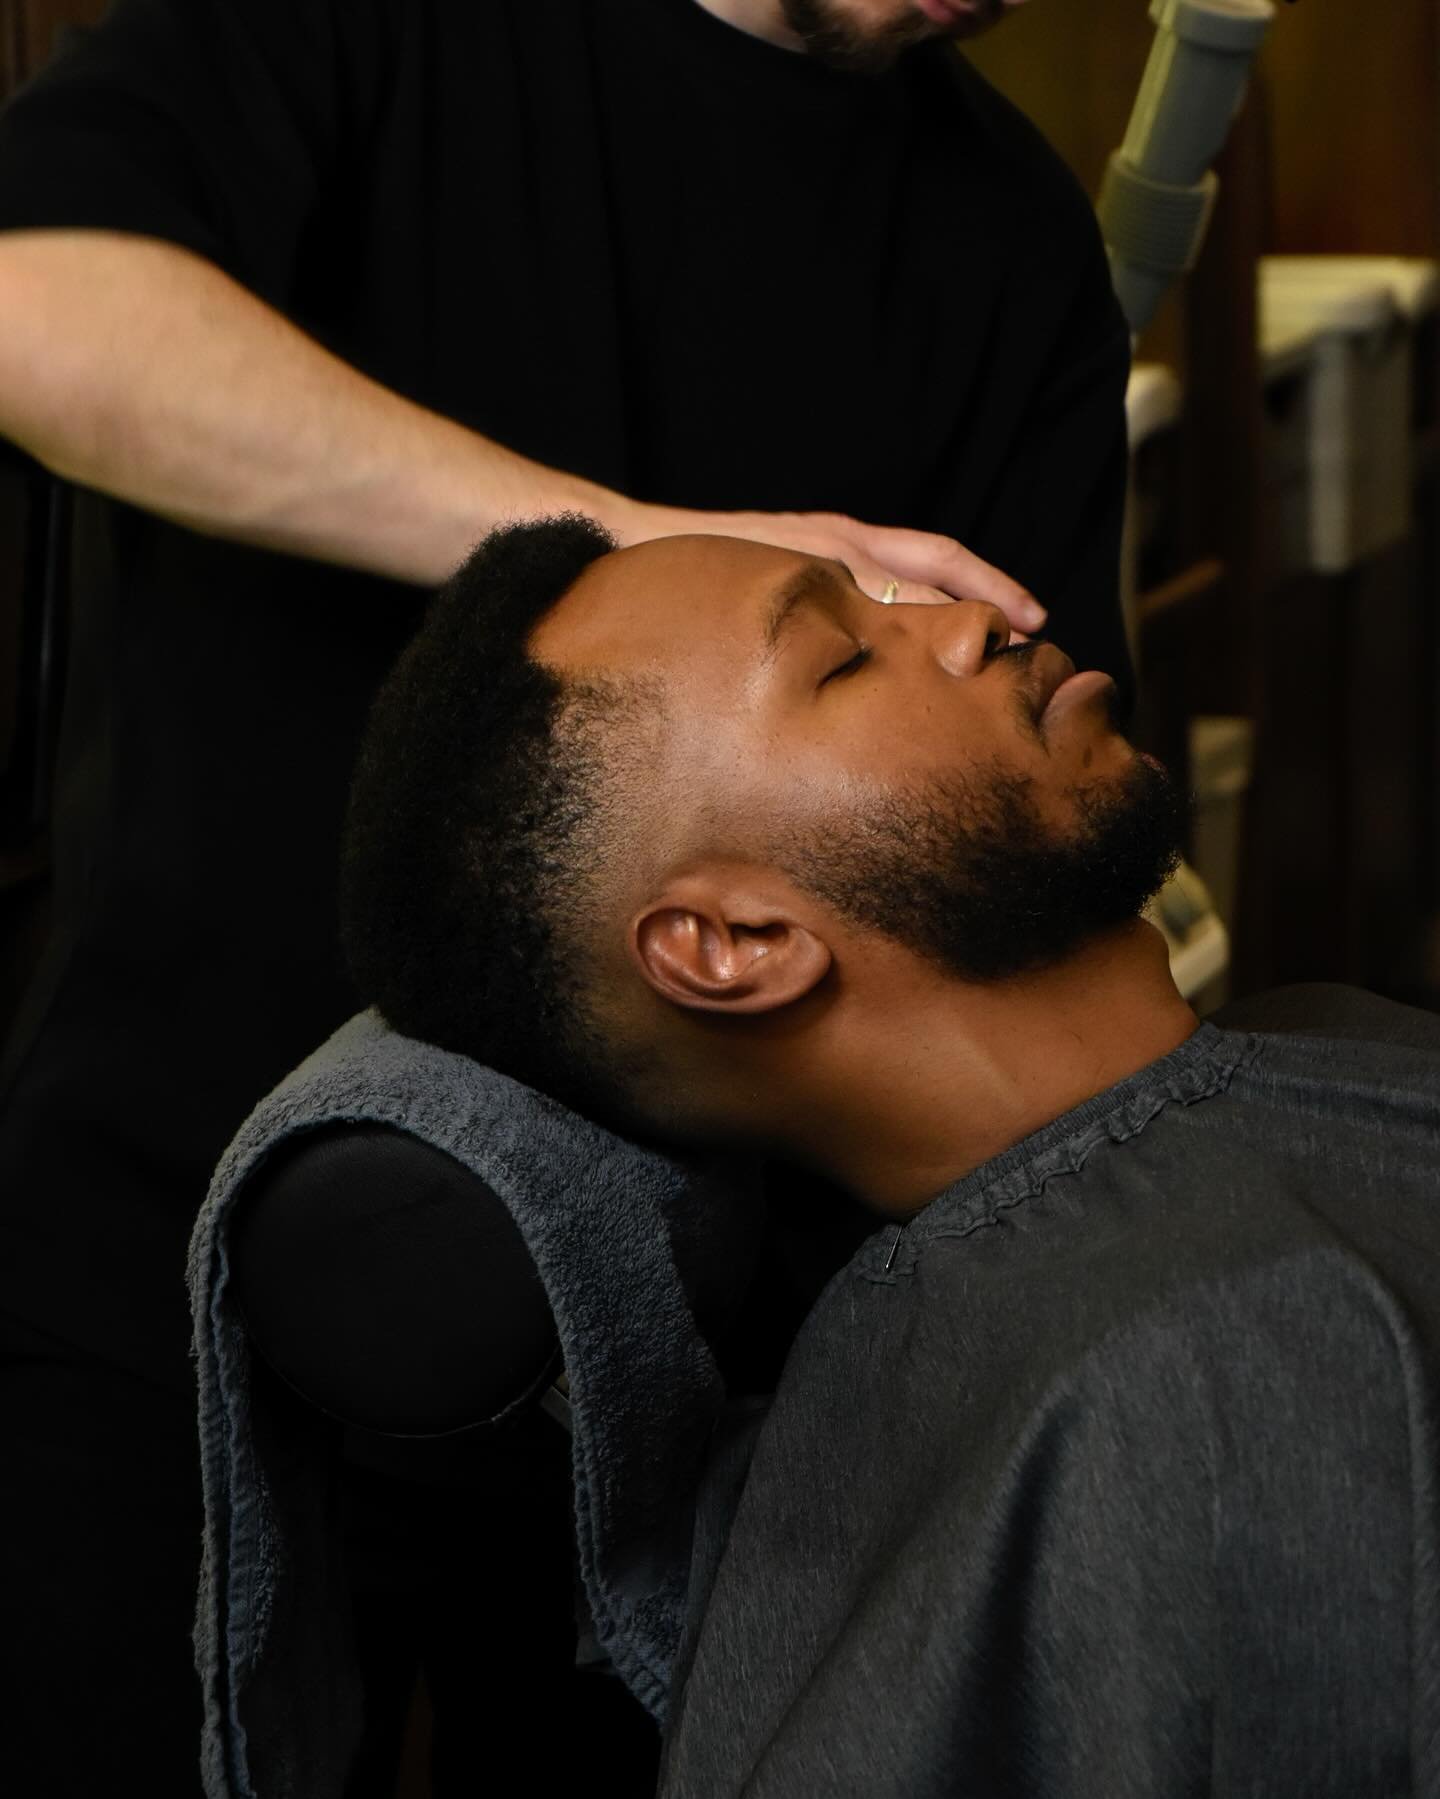 Relaxation and the best grooming experience leads to priceless moments (and smiles). Swipe for the end result! And, we&rsquo;ll see you here soon!
. 
Click the link in our bio to book complimentary consultation, a grooming session or purchase a gift 